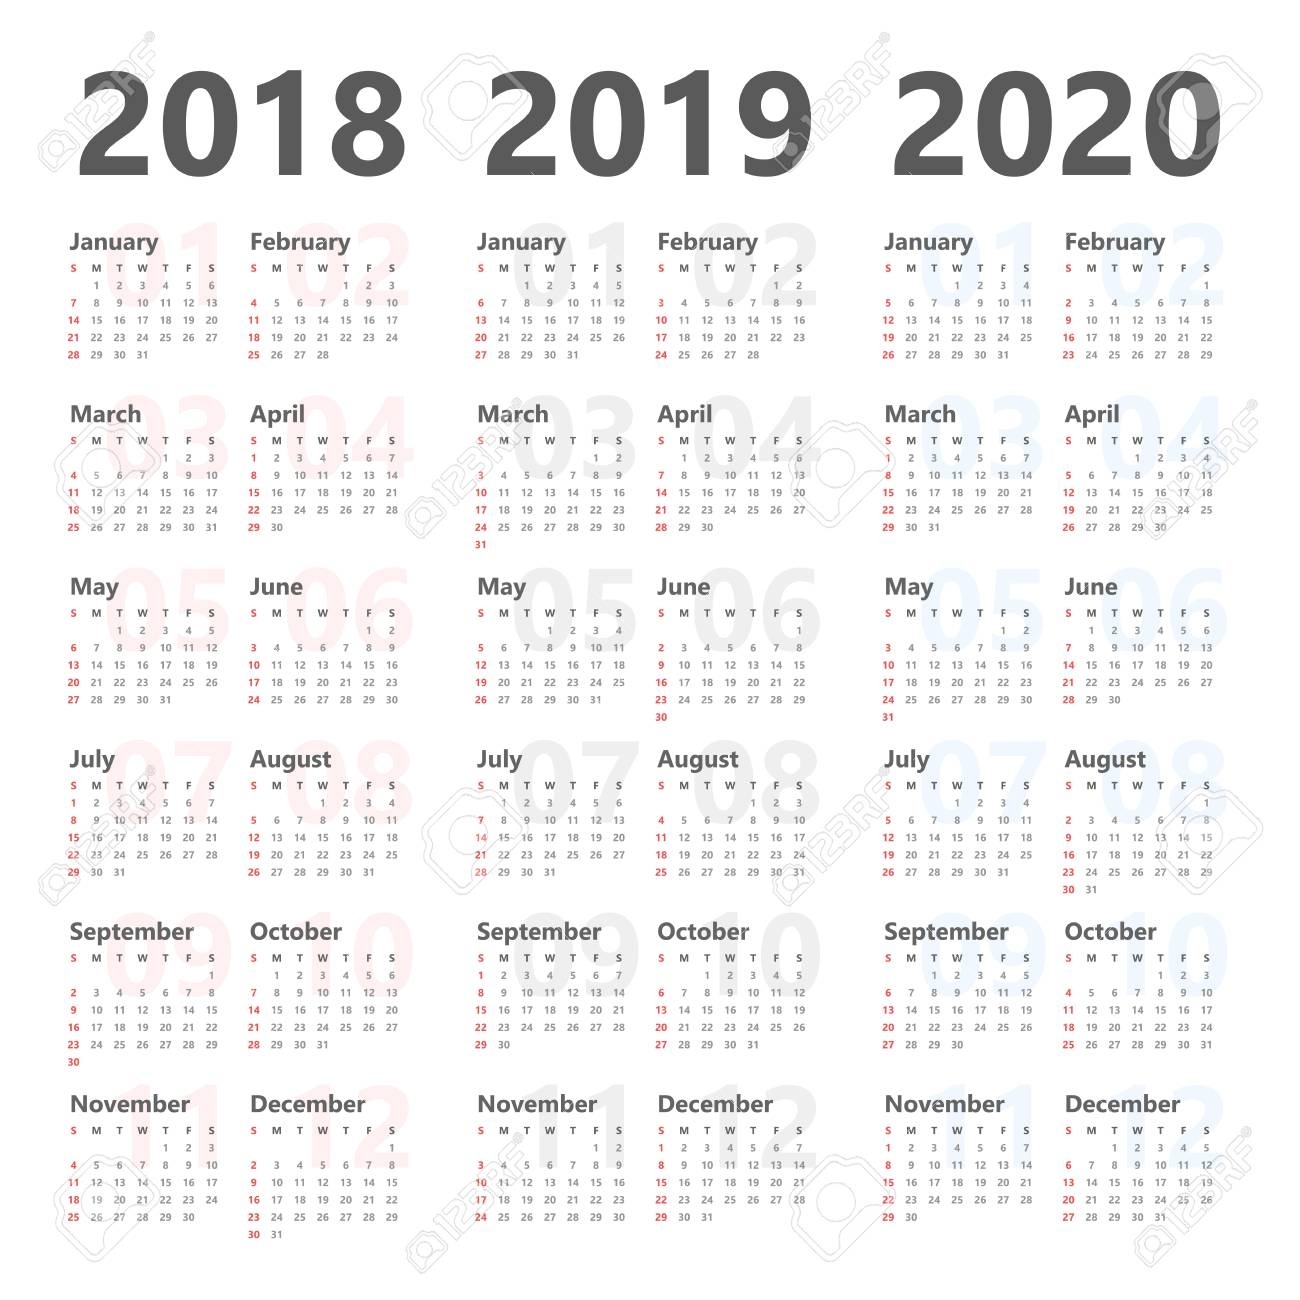 Yearly Calendar Template For 2018 To 2020. Royalty Free Cliparts 3 Year Calendar Template